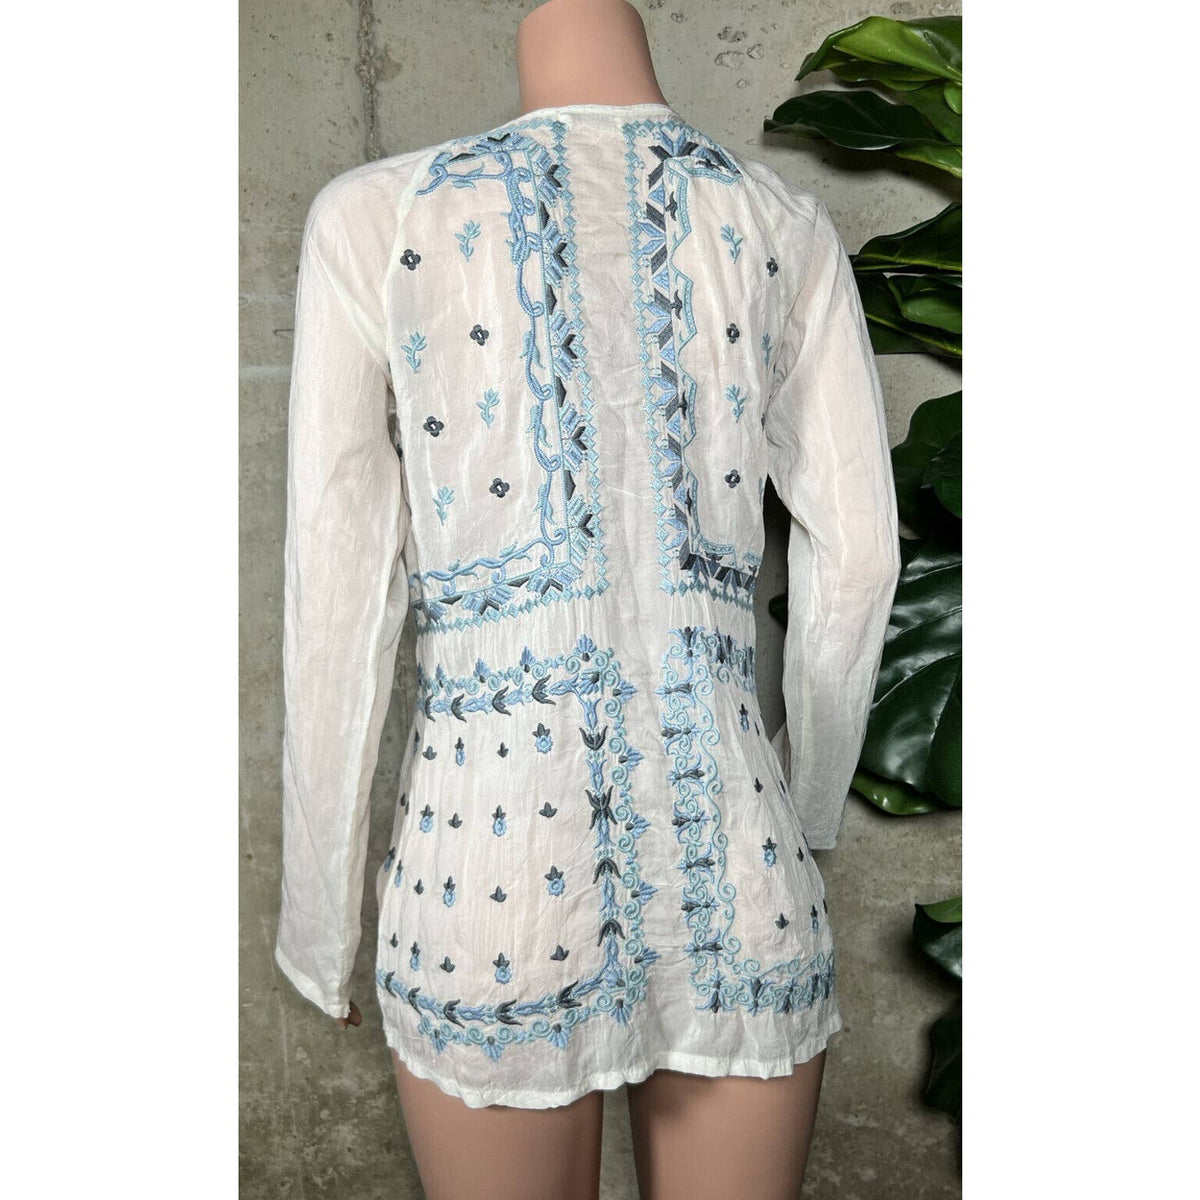 Johnny Was Ivory and Blue Embroidered Blouse Sz. XS